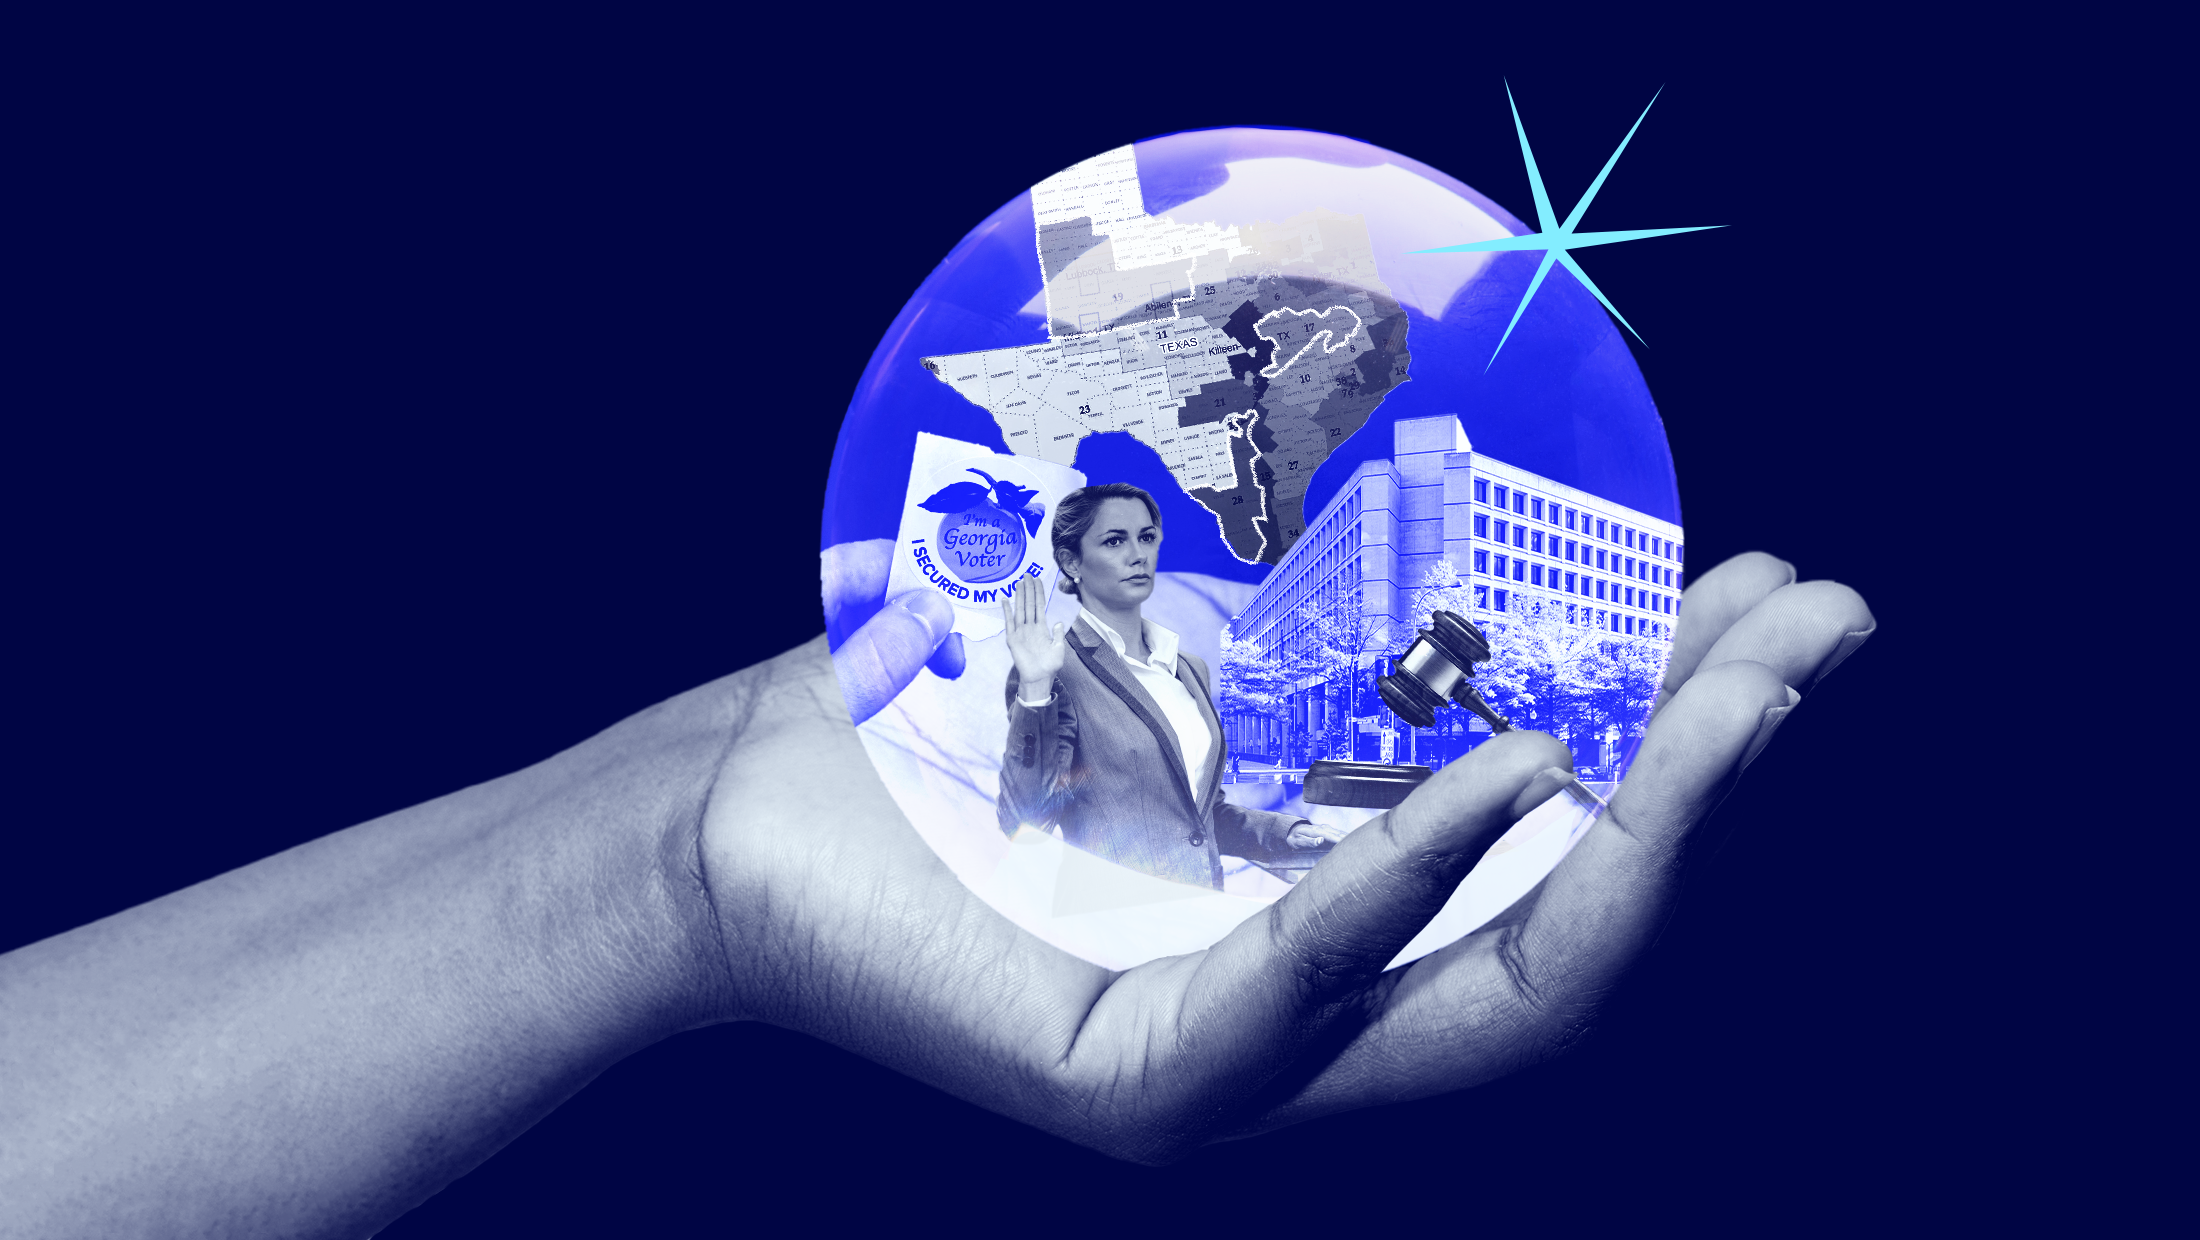 A dark blue background with a hand holding a crystal ball revealing a Georgia "I Voted" sticker, a map showing districts in Texas, the U.S. Department of Justice building, a gavel and a picture of a woman testifying in court